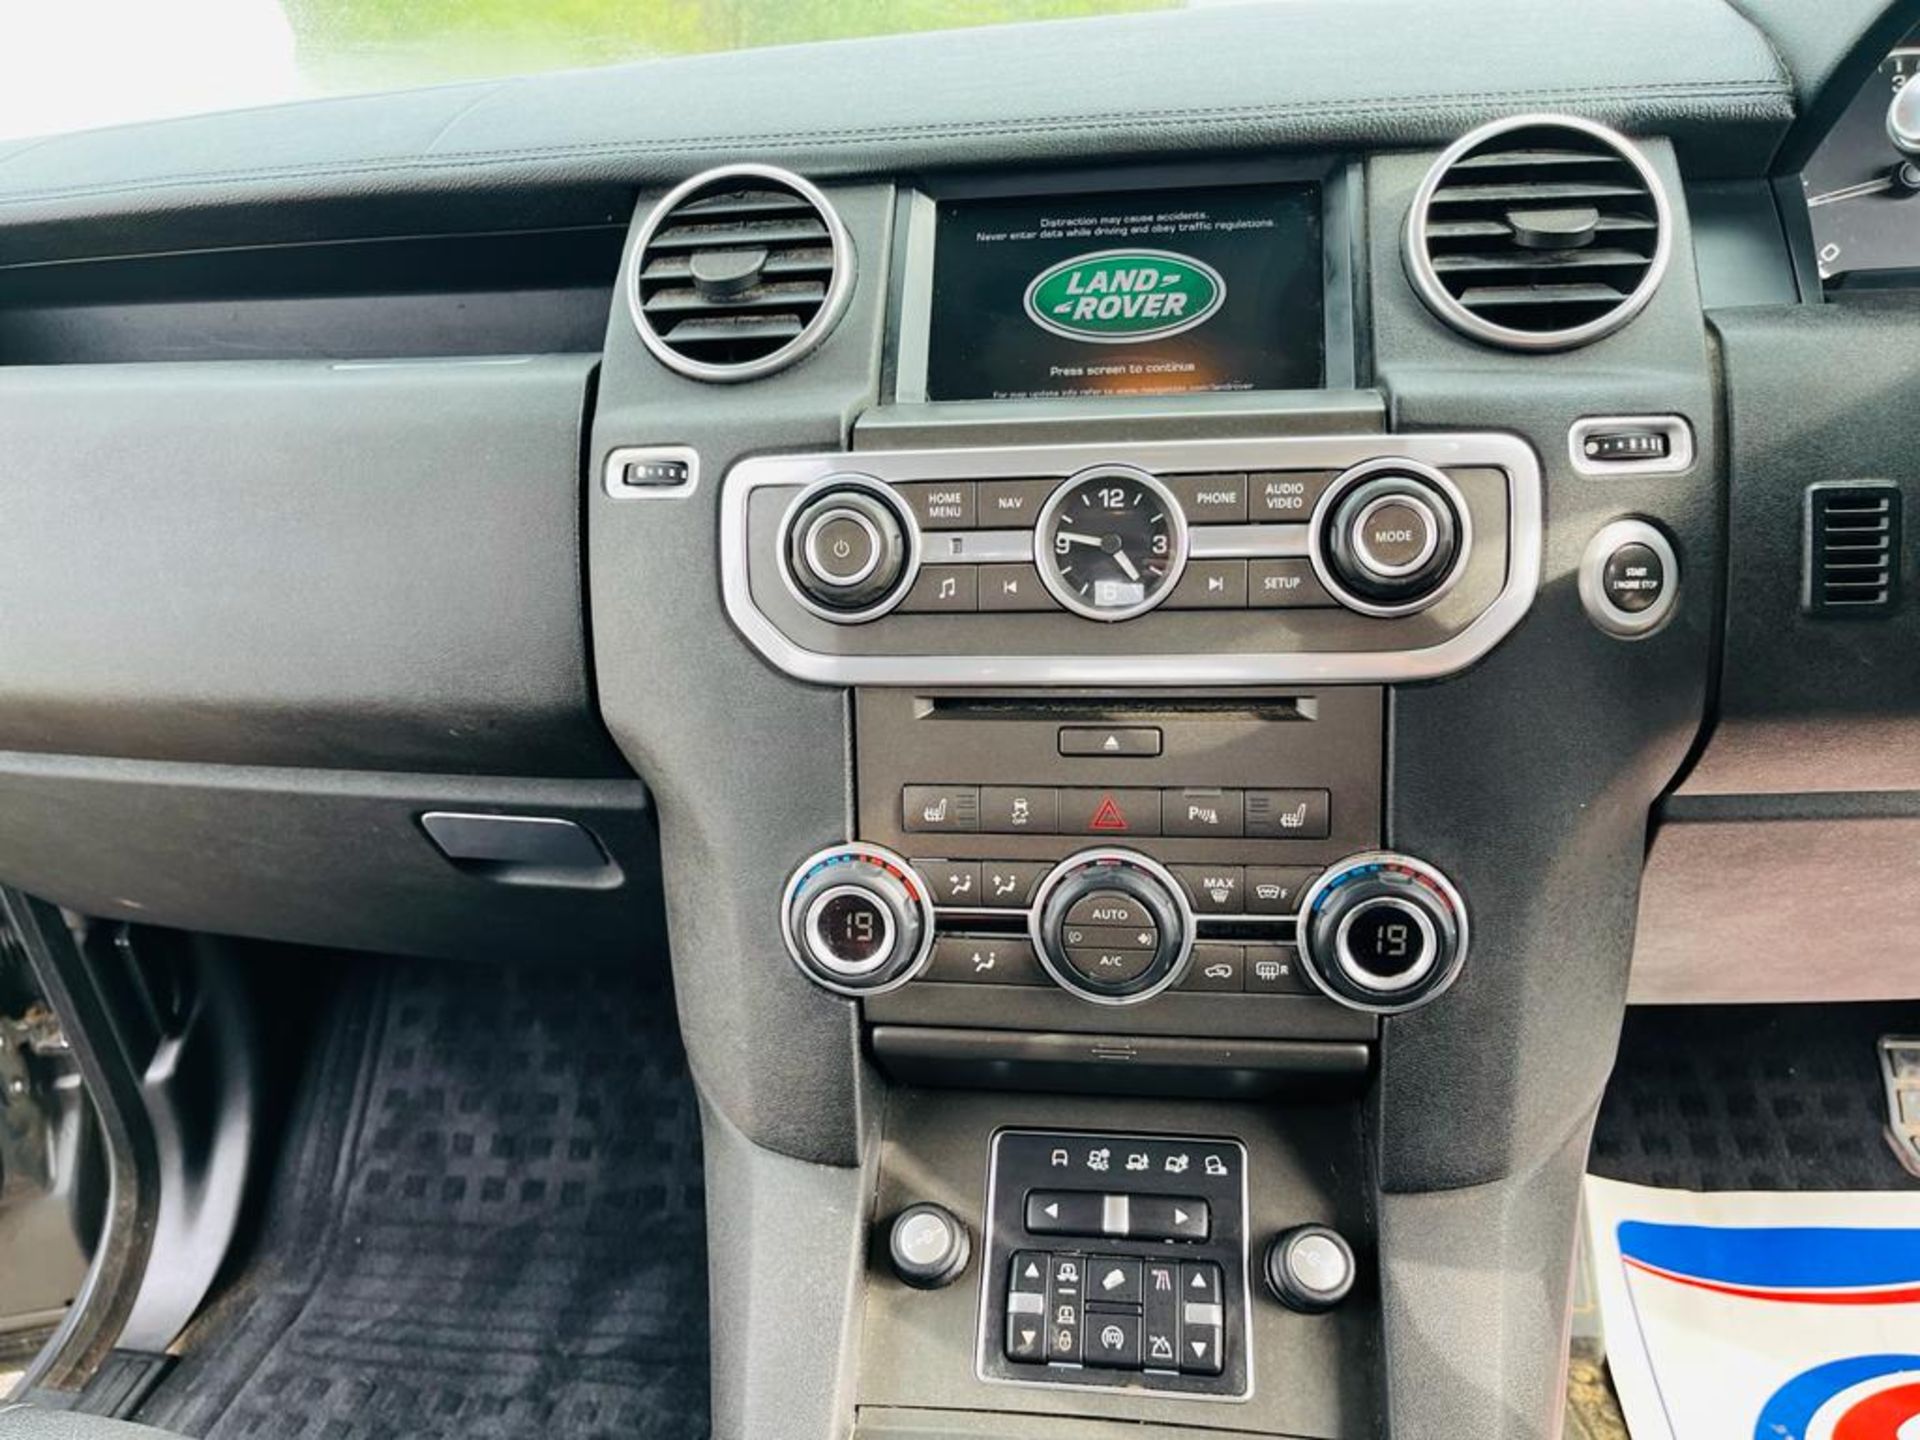 ** ON SALE **Land Rover Discovery 4 XS 3.0 SDV6 CommandShift Auto Commercial 2015 '65 Reg' - Sat Nav - Image 10 of 25